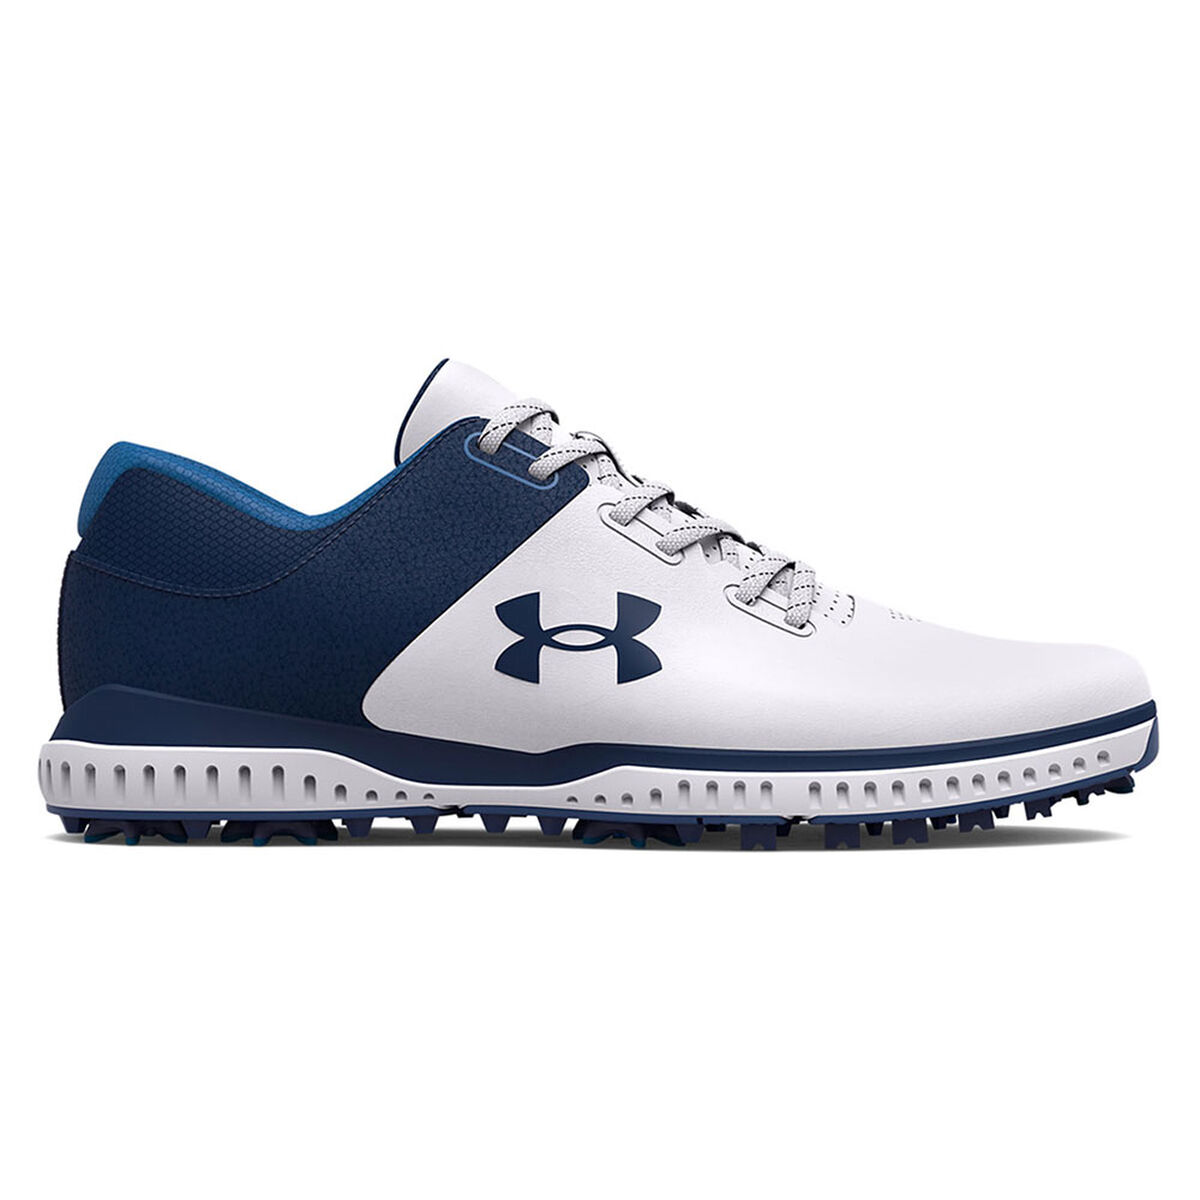 Under Armour Men’s Medal RST Waterproof Spiked Golf Shoes, Mens, White/academy/academy, 7.5 | American Golf